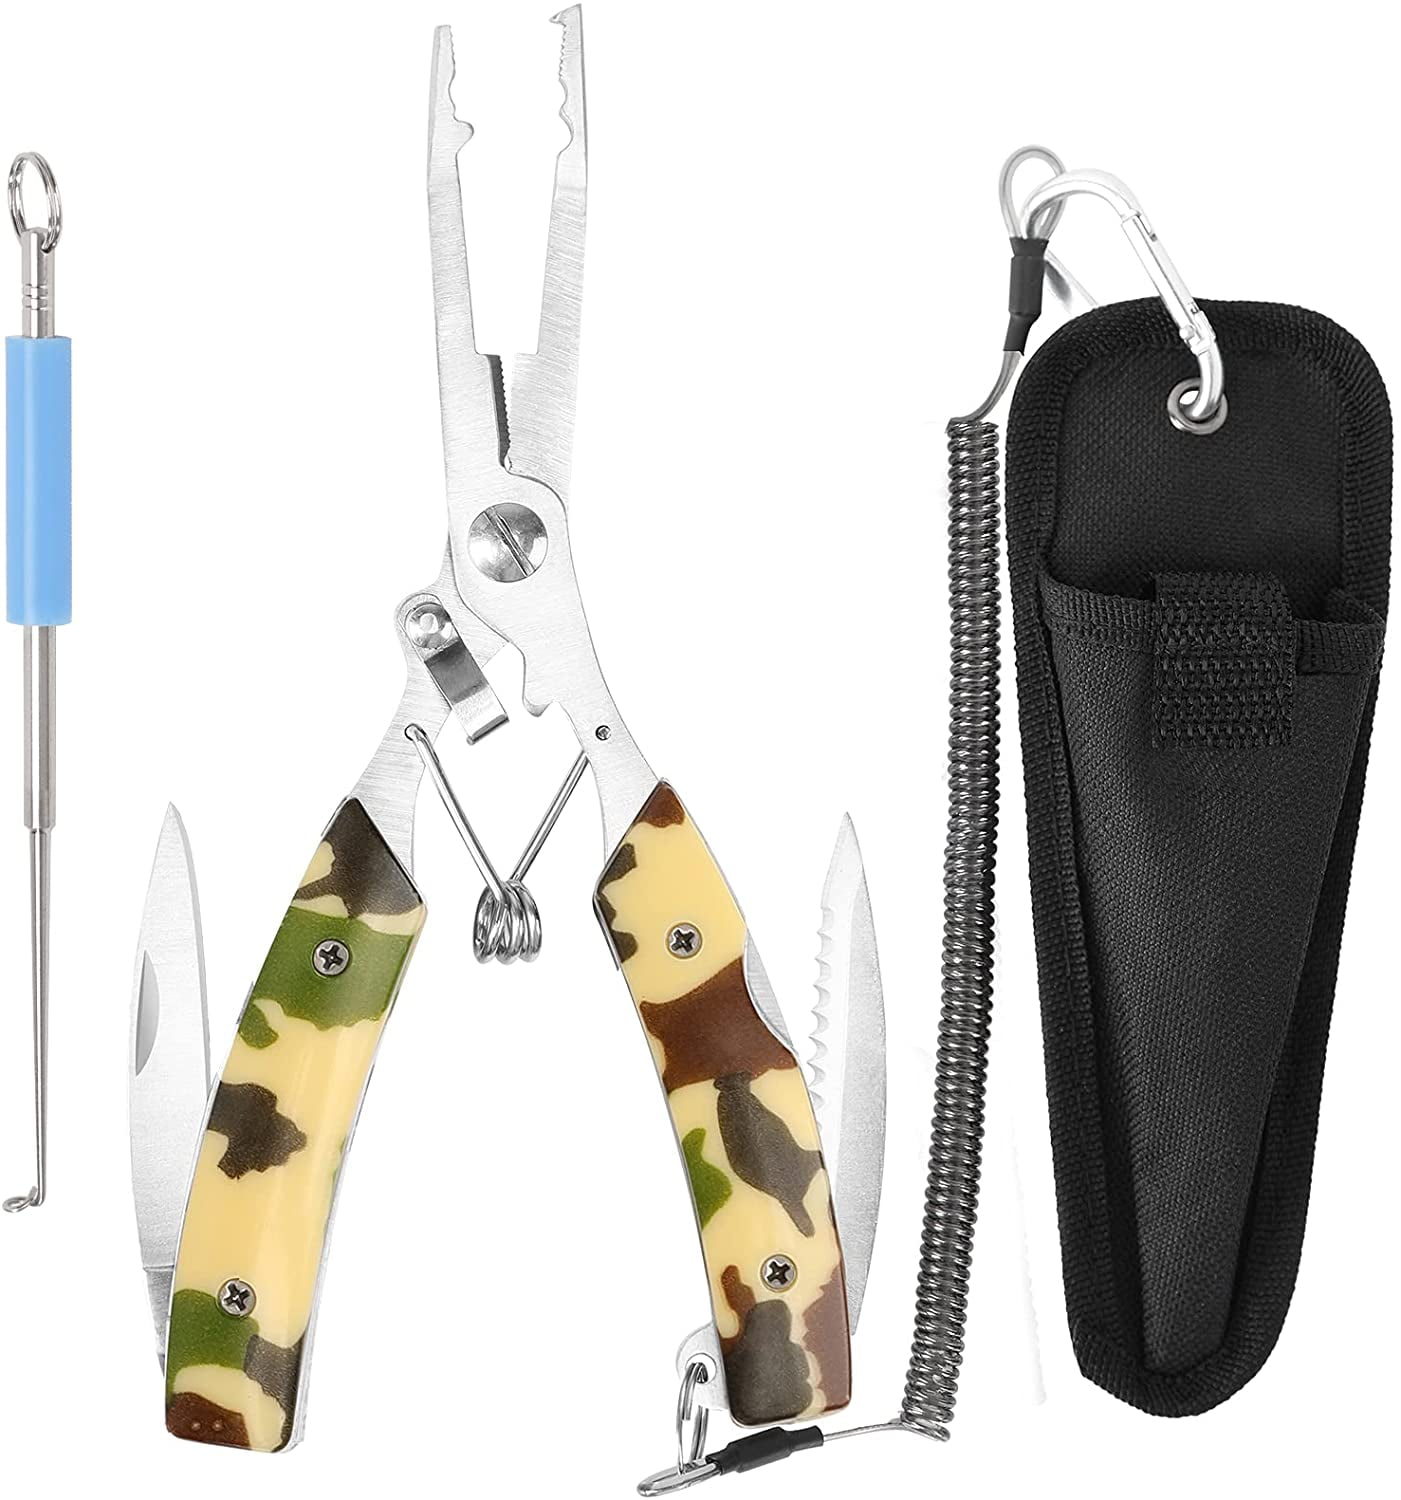 FZENeast Fishing Pliers, Stainless Steel Multifunctional Fish Pliers,  Camouflage Fishing Tool with Hook Remover, Sheath and Lanyard, Fishing  Gifts for Men 